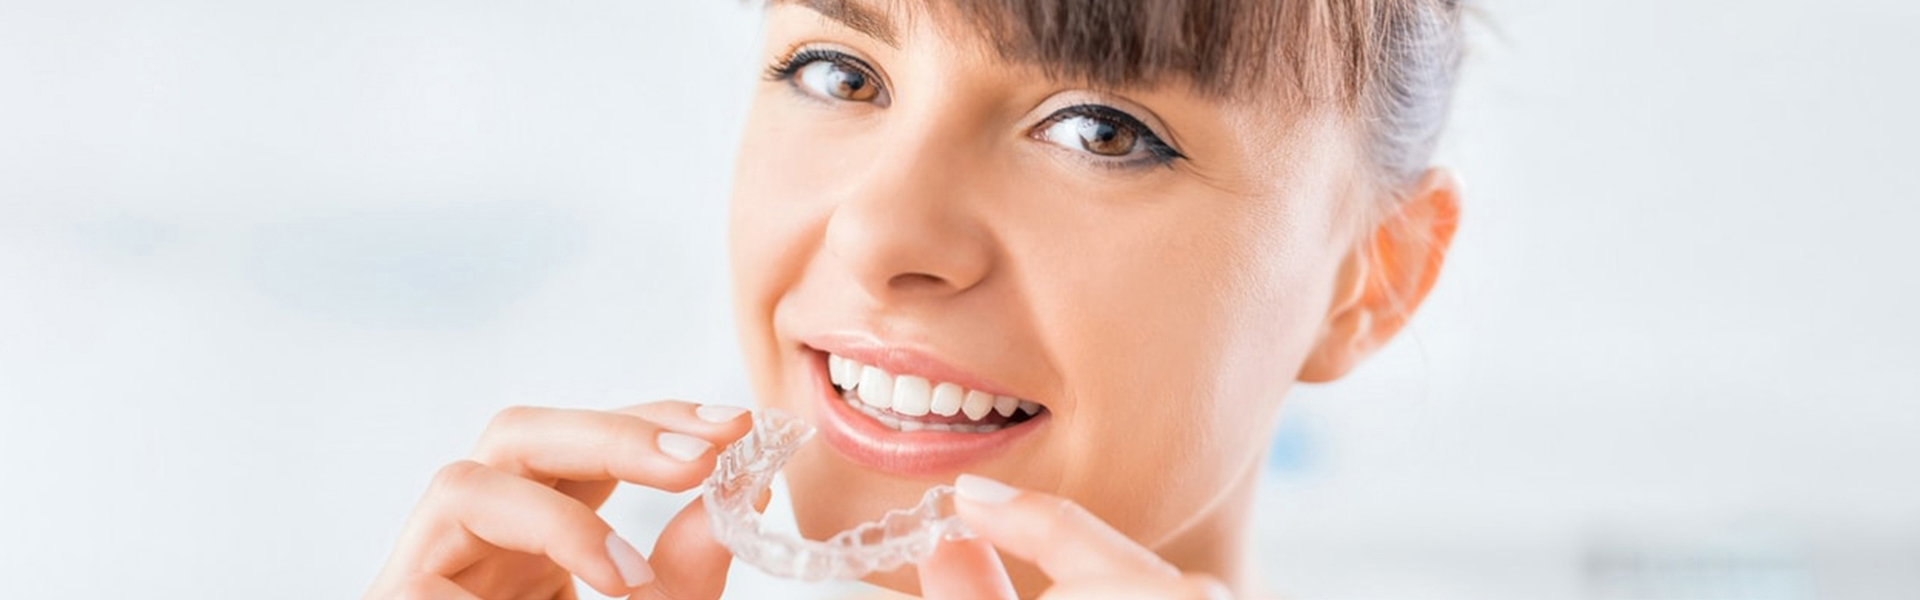 Invisalign® Braces: An Excellent Treatment Option for Orthodontic Dental Issues